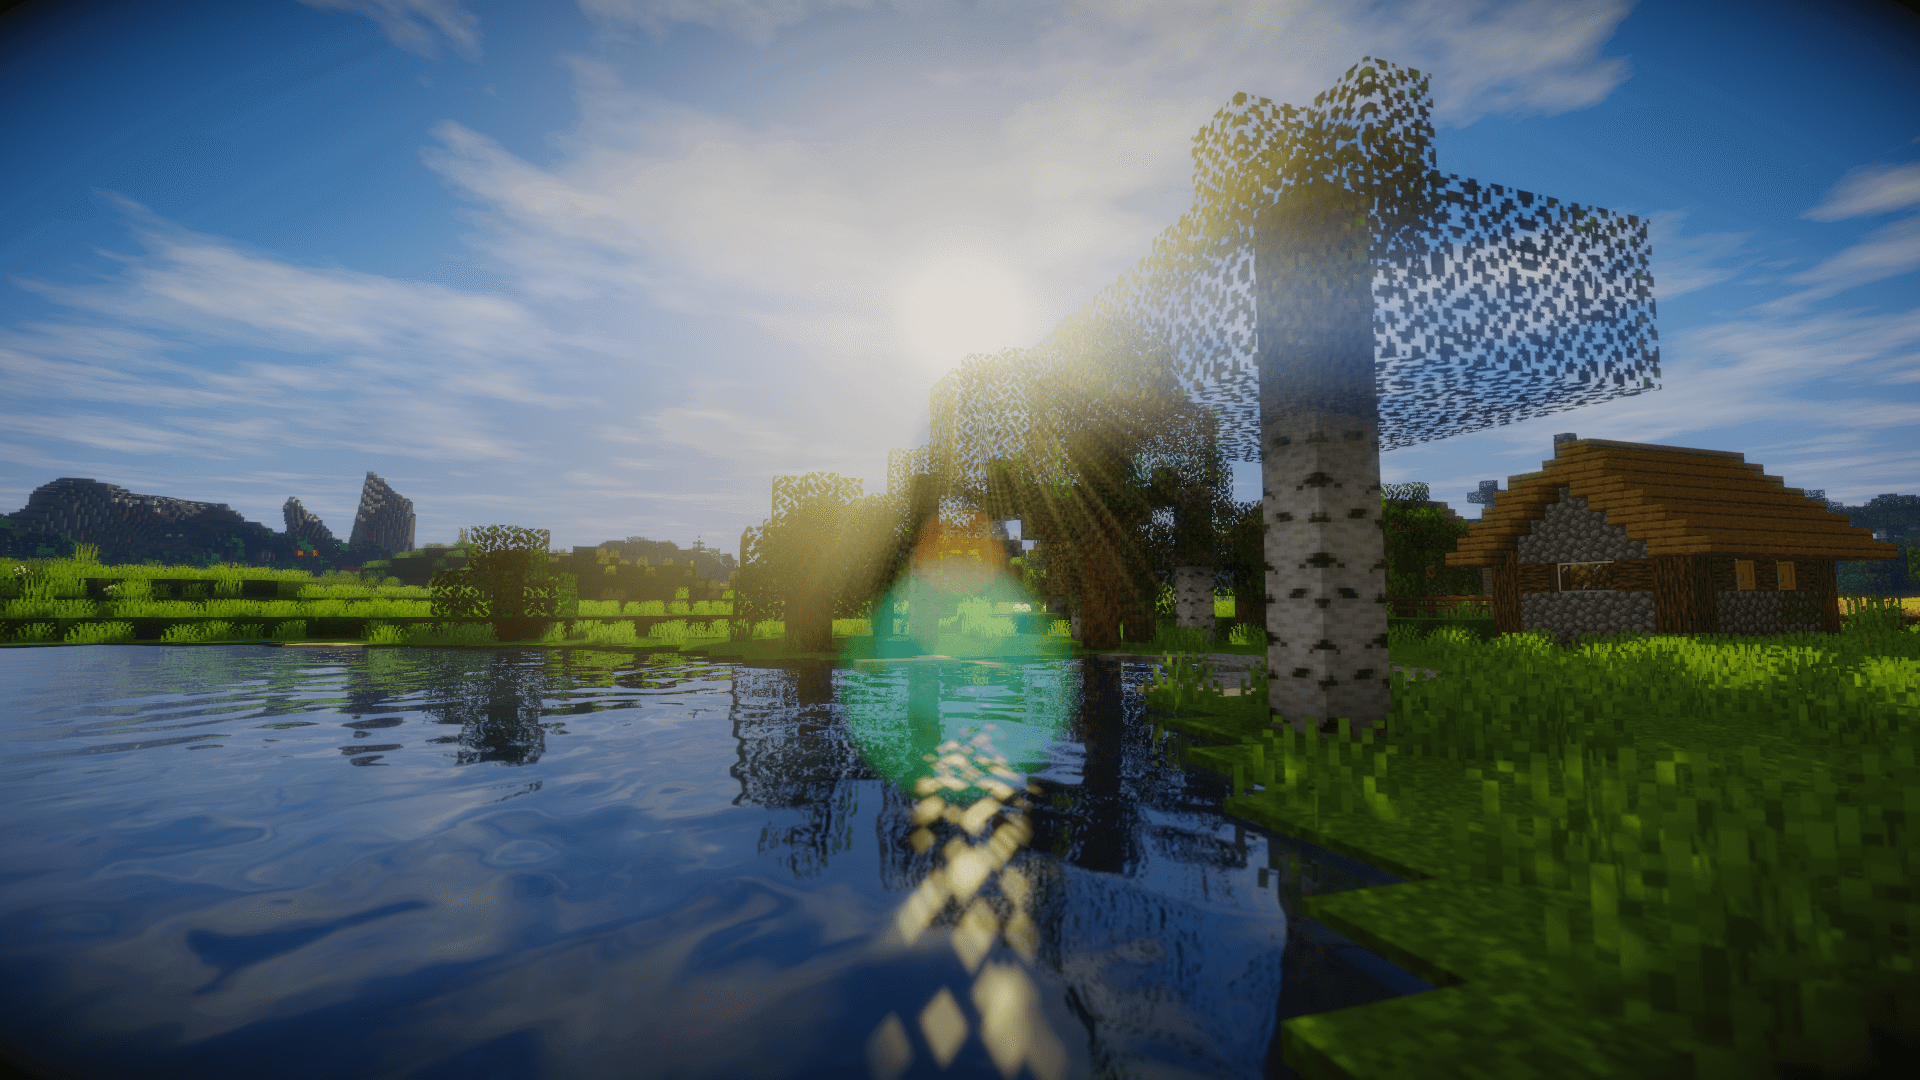 minecraft shaders texture pack 1.11 download